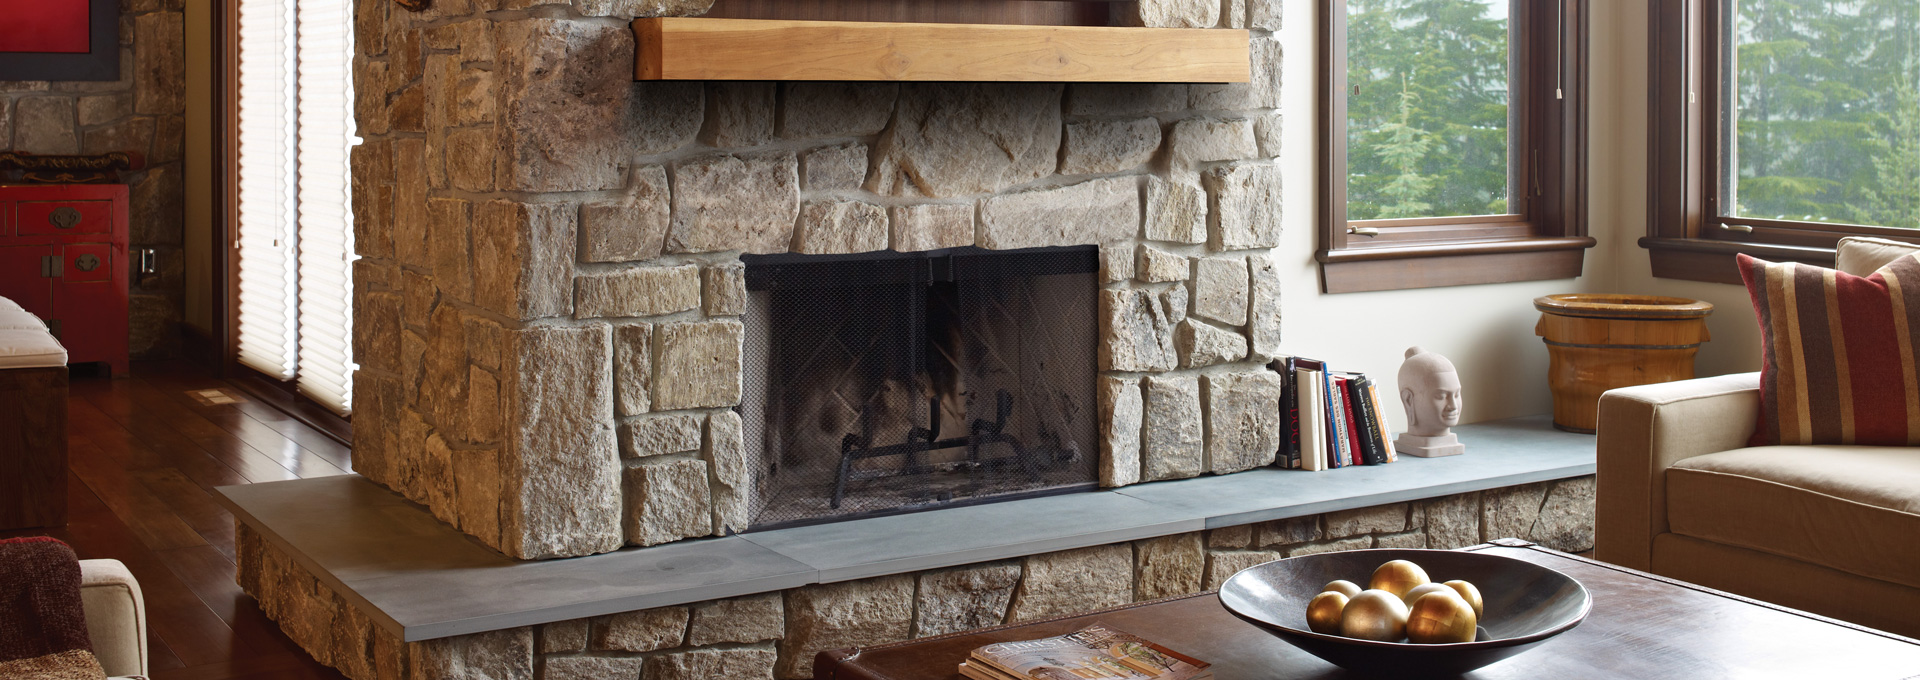 Fireplace Buyers Guide: The First Steps 